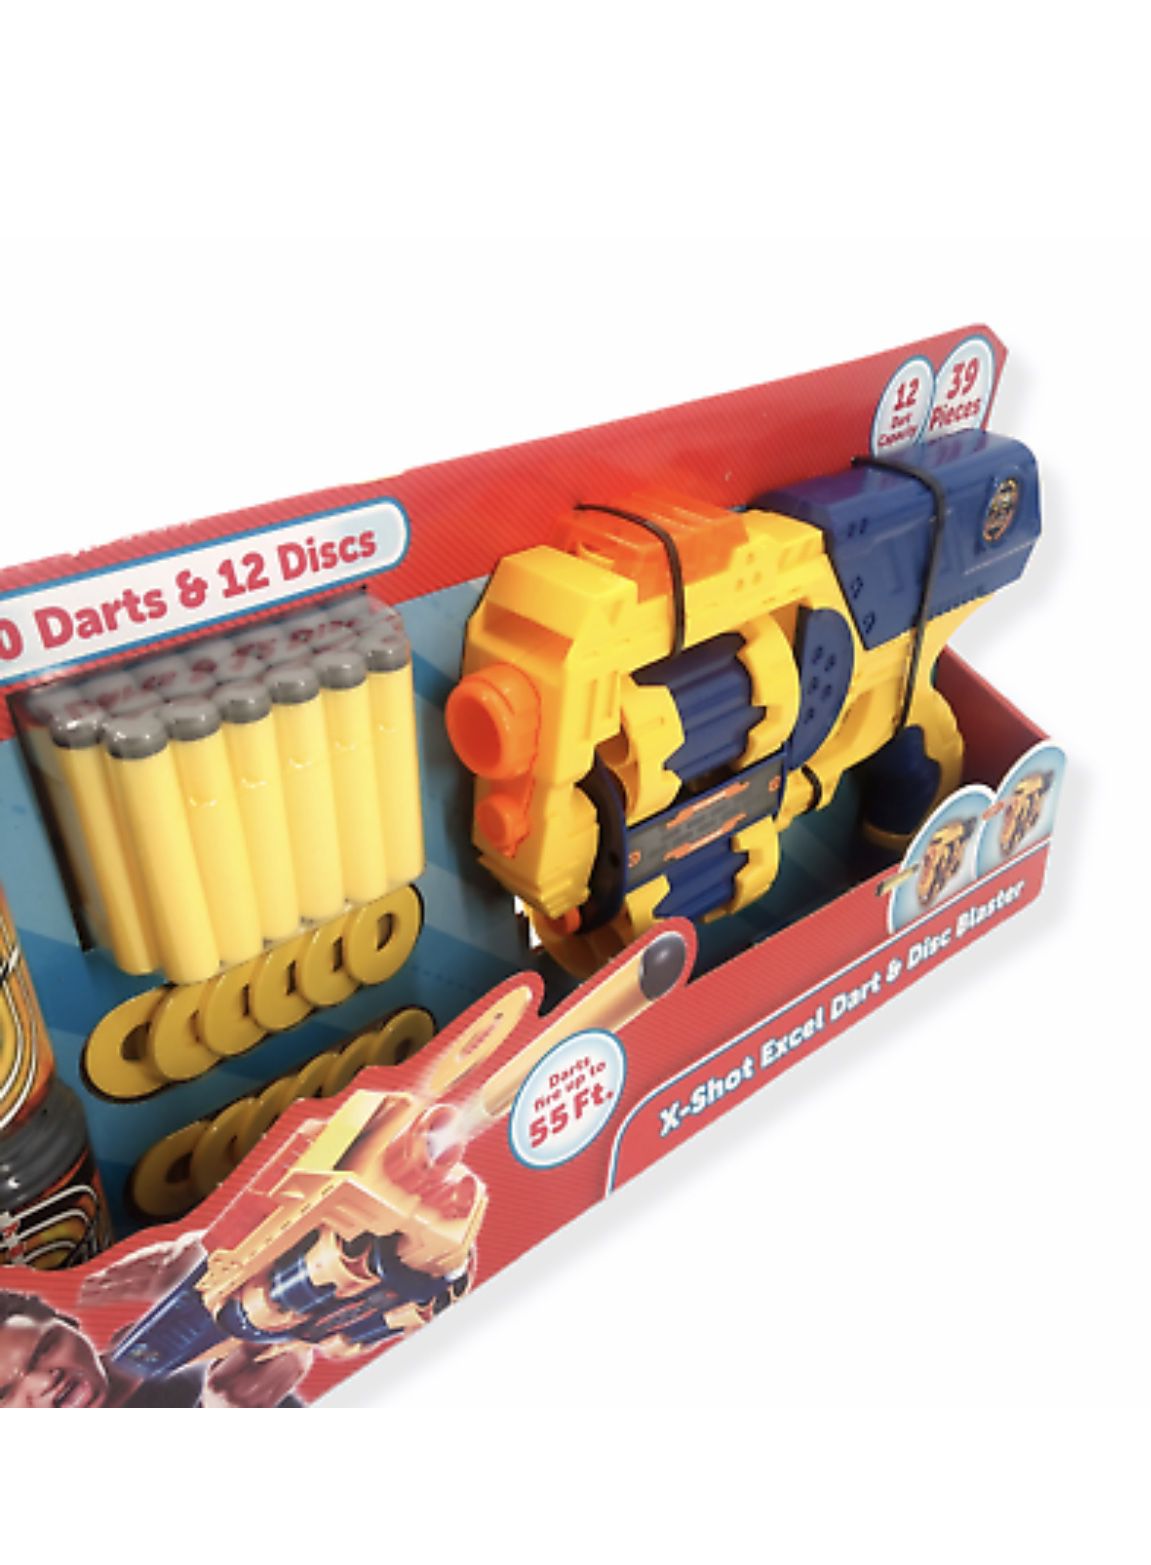 Dart And Disc Shooter New In Box